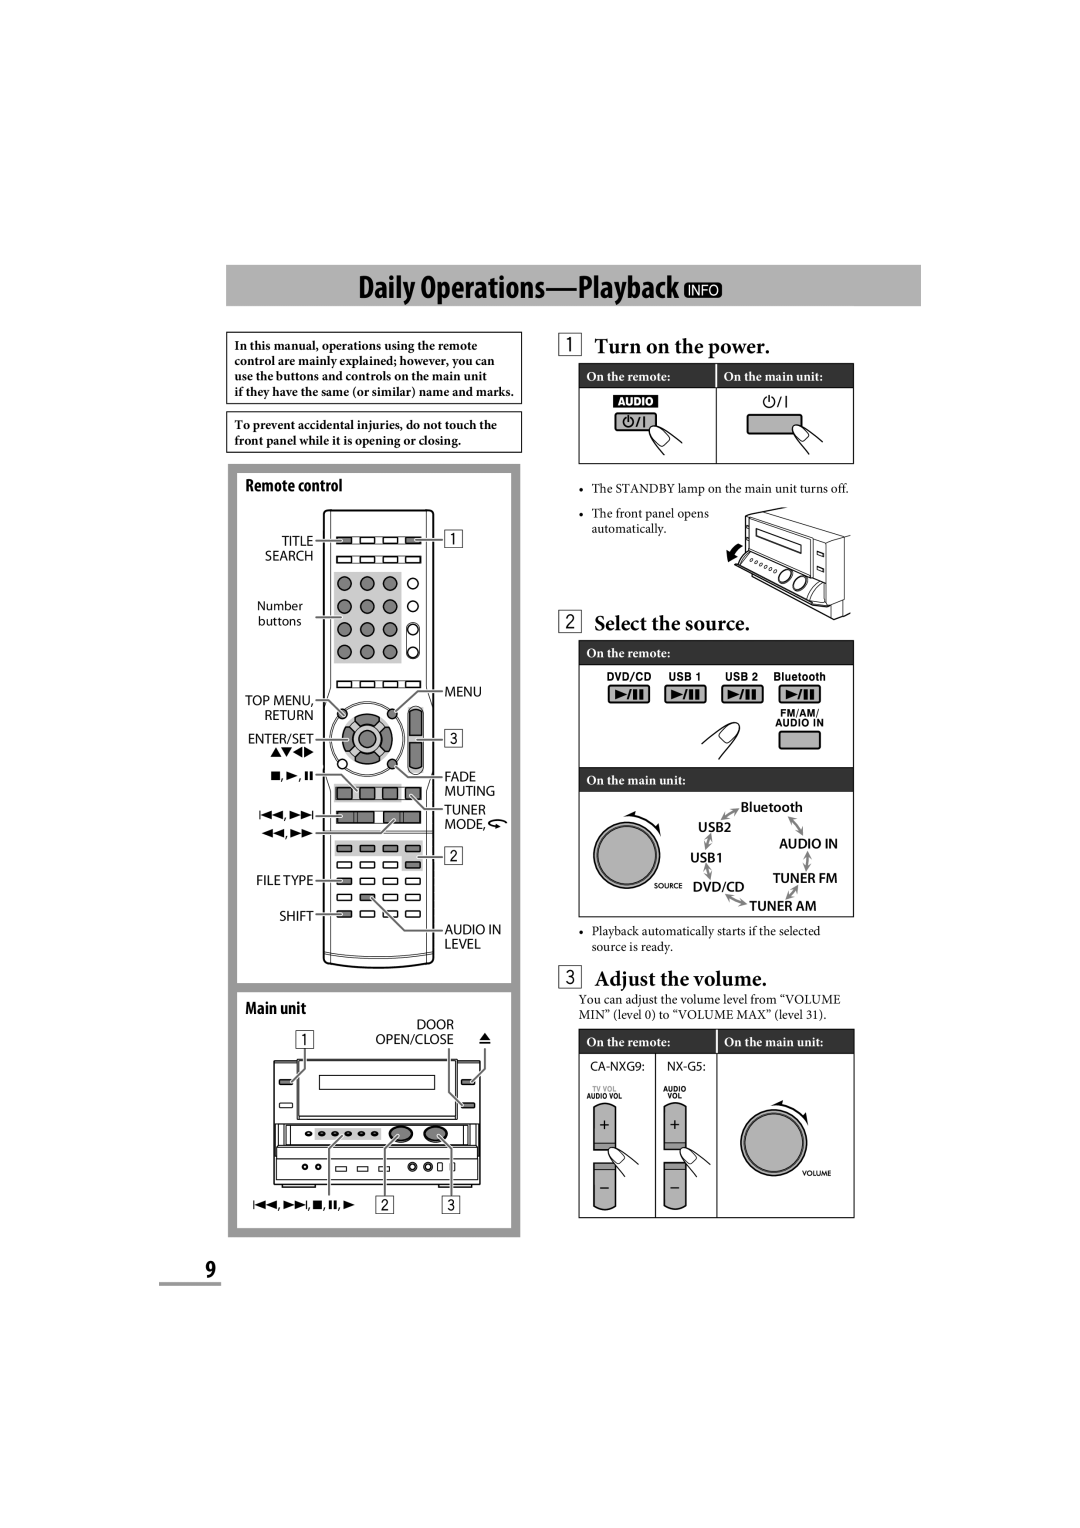 JVC CA-NXG9 manual Daily Operations-Playback, 1Turn on the power, 2Select the source, 3Adjust the volume, Remote control 